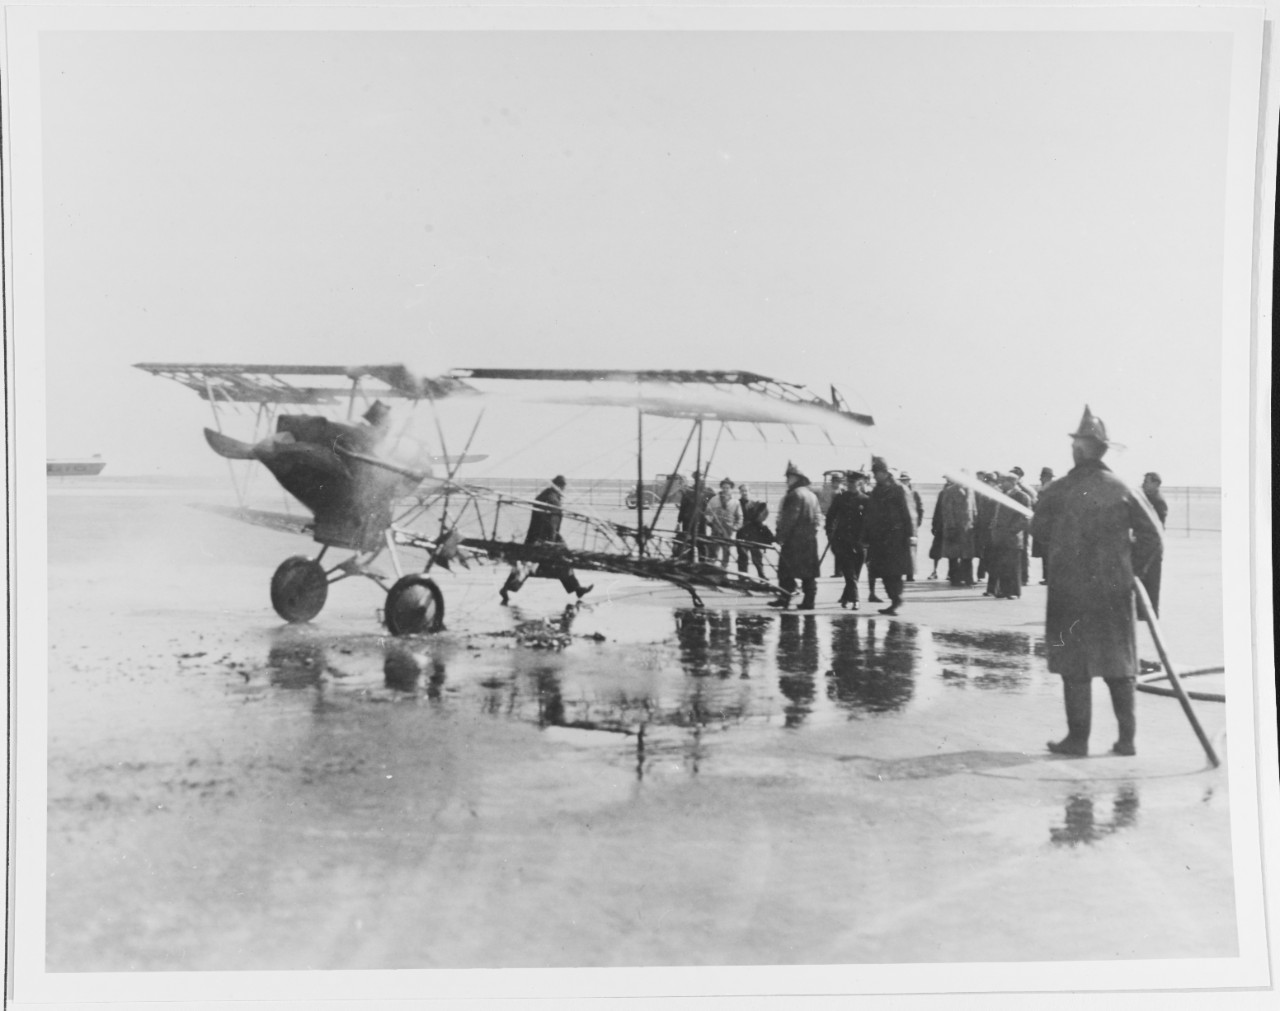 Aircraft destroyed by accidental fire at Floyd Bennett Field, New York.